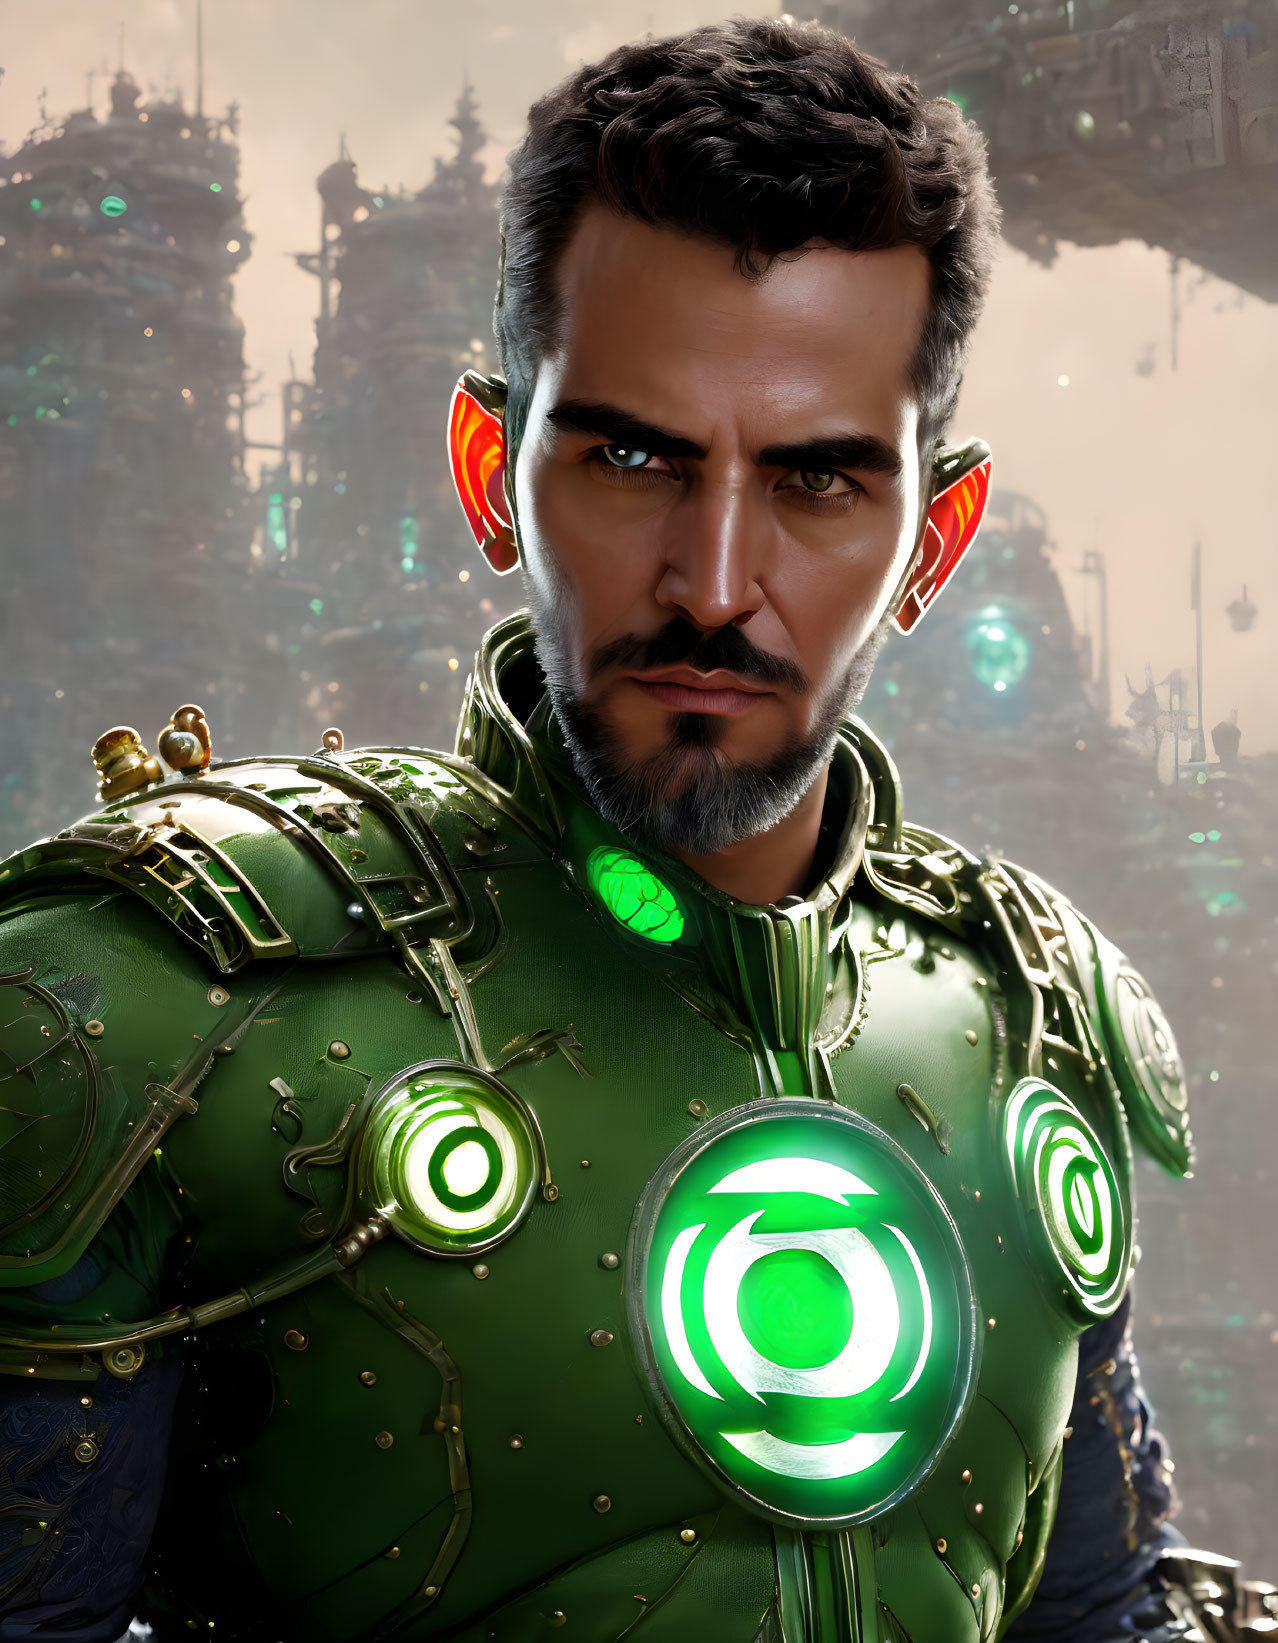 Bearded man in futuristic green armor with circular emblem against industrial backdrop